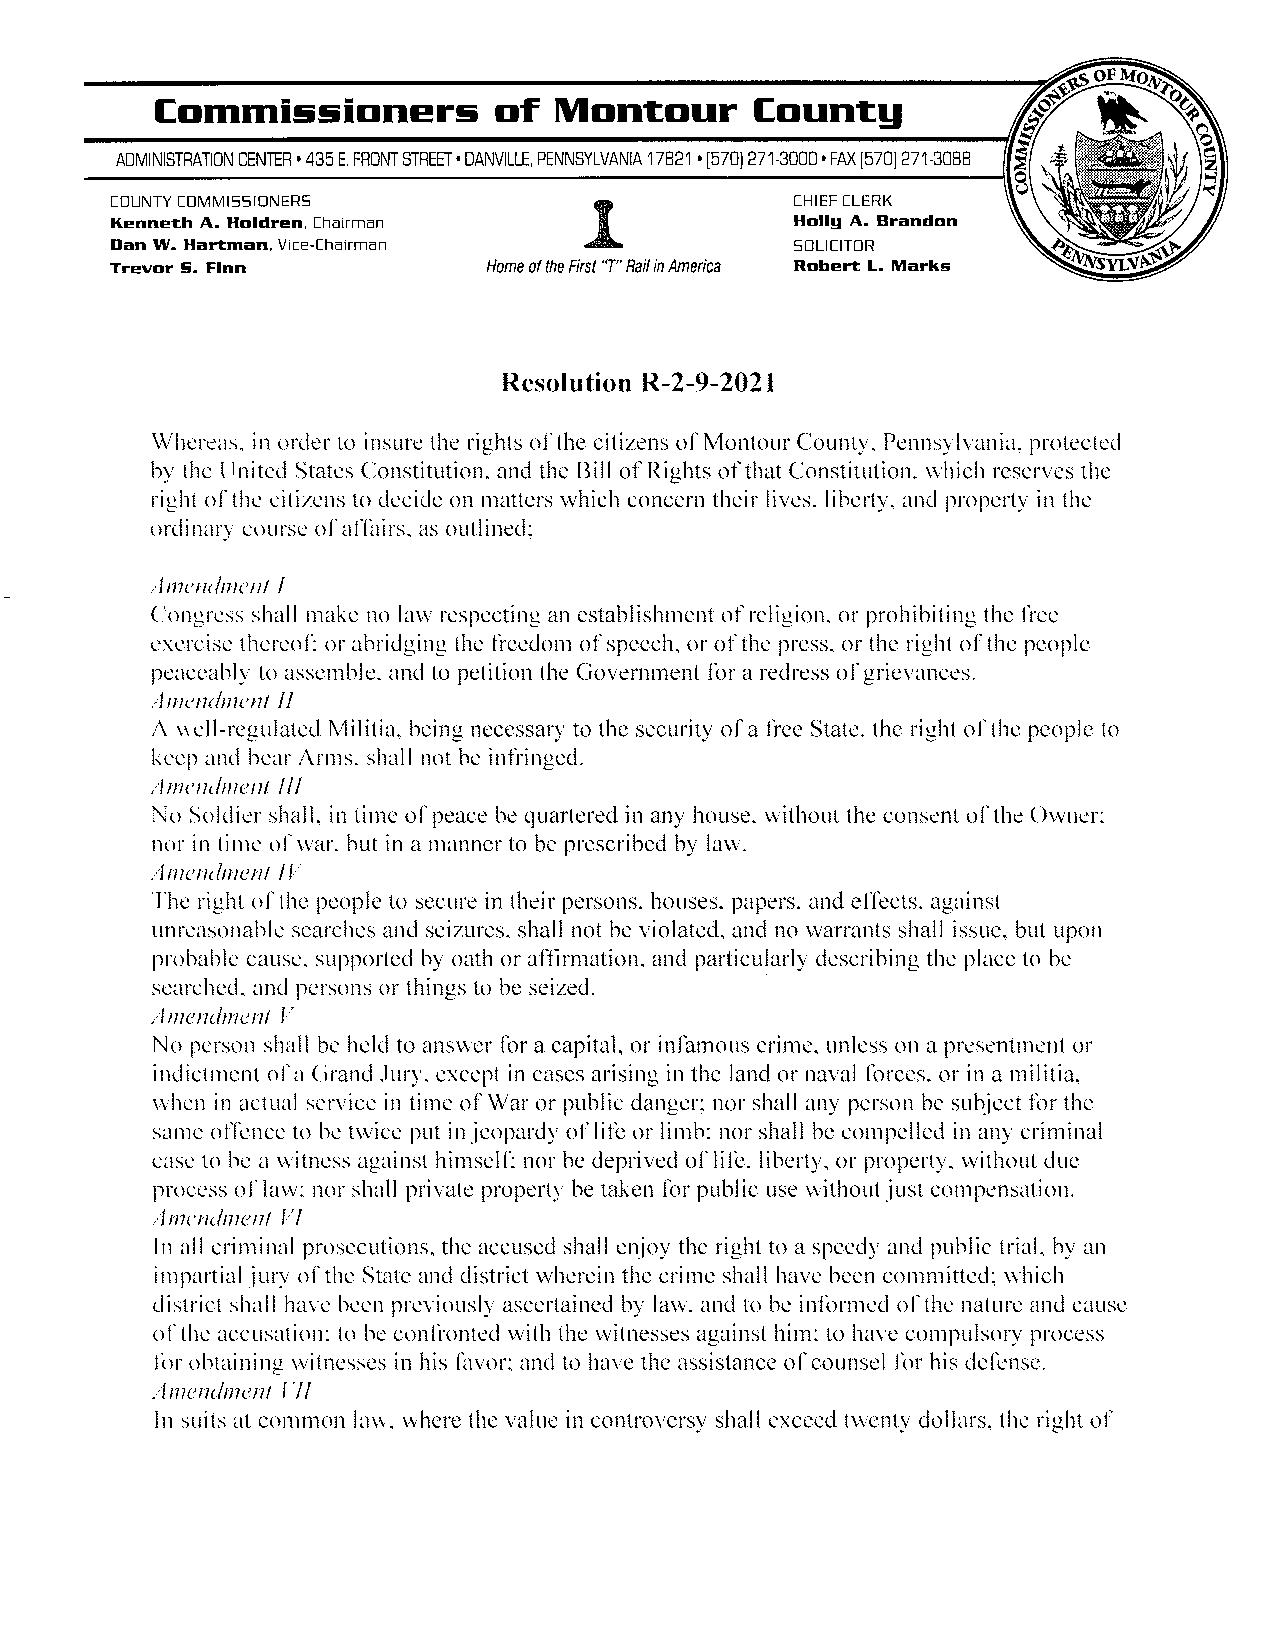 Montour County Bill of Rights Sanctuary Signed Resolution R-2-9-2021 page 1